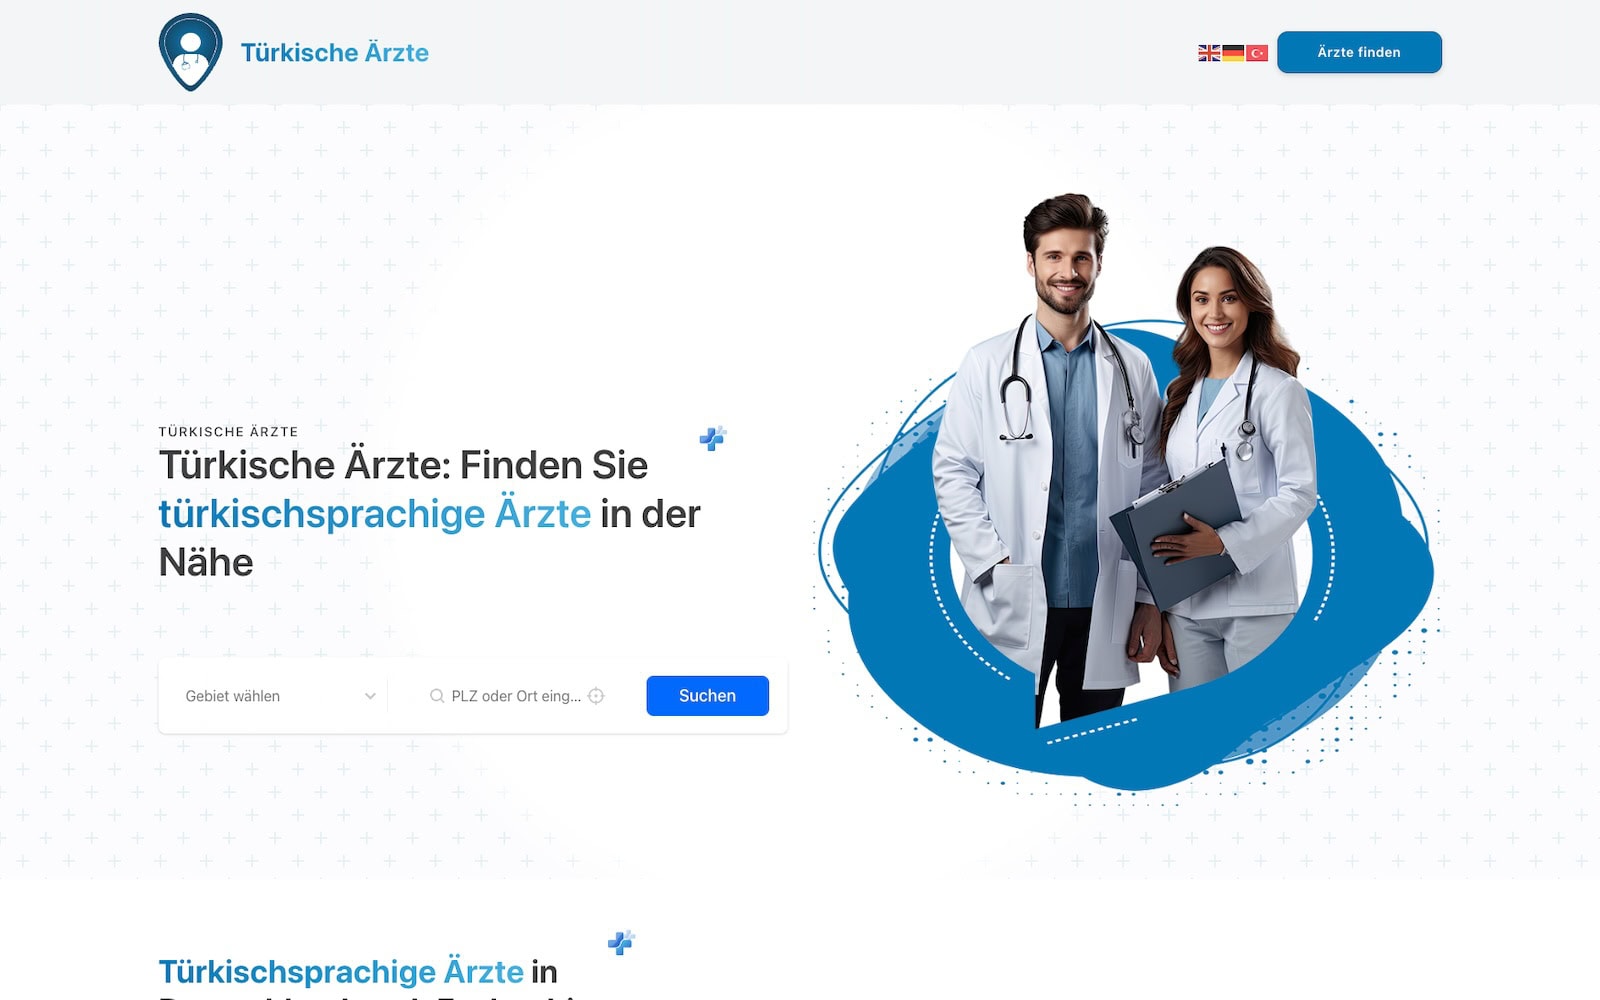 A homepage with two doctors and a search function. It contains text in German and offers an option to change the language at the top right.